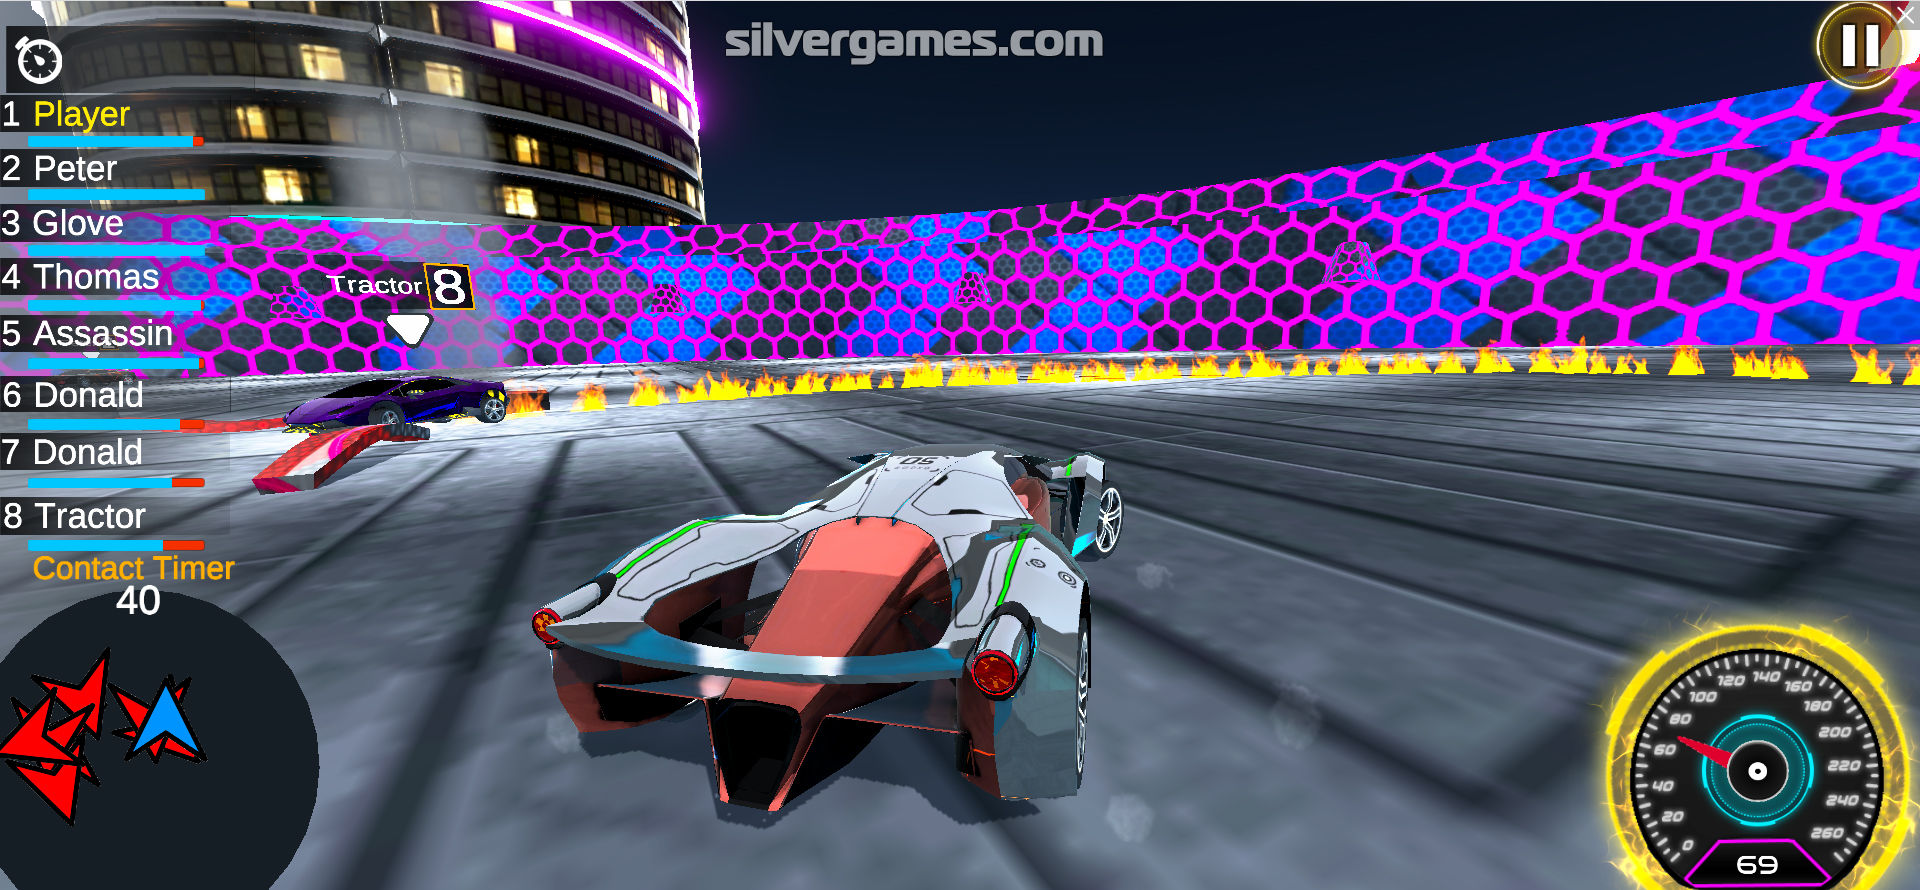 CYBER CARS PUNK RACING - Play Online for Free!